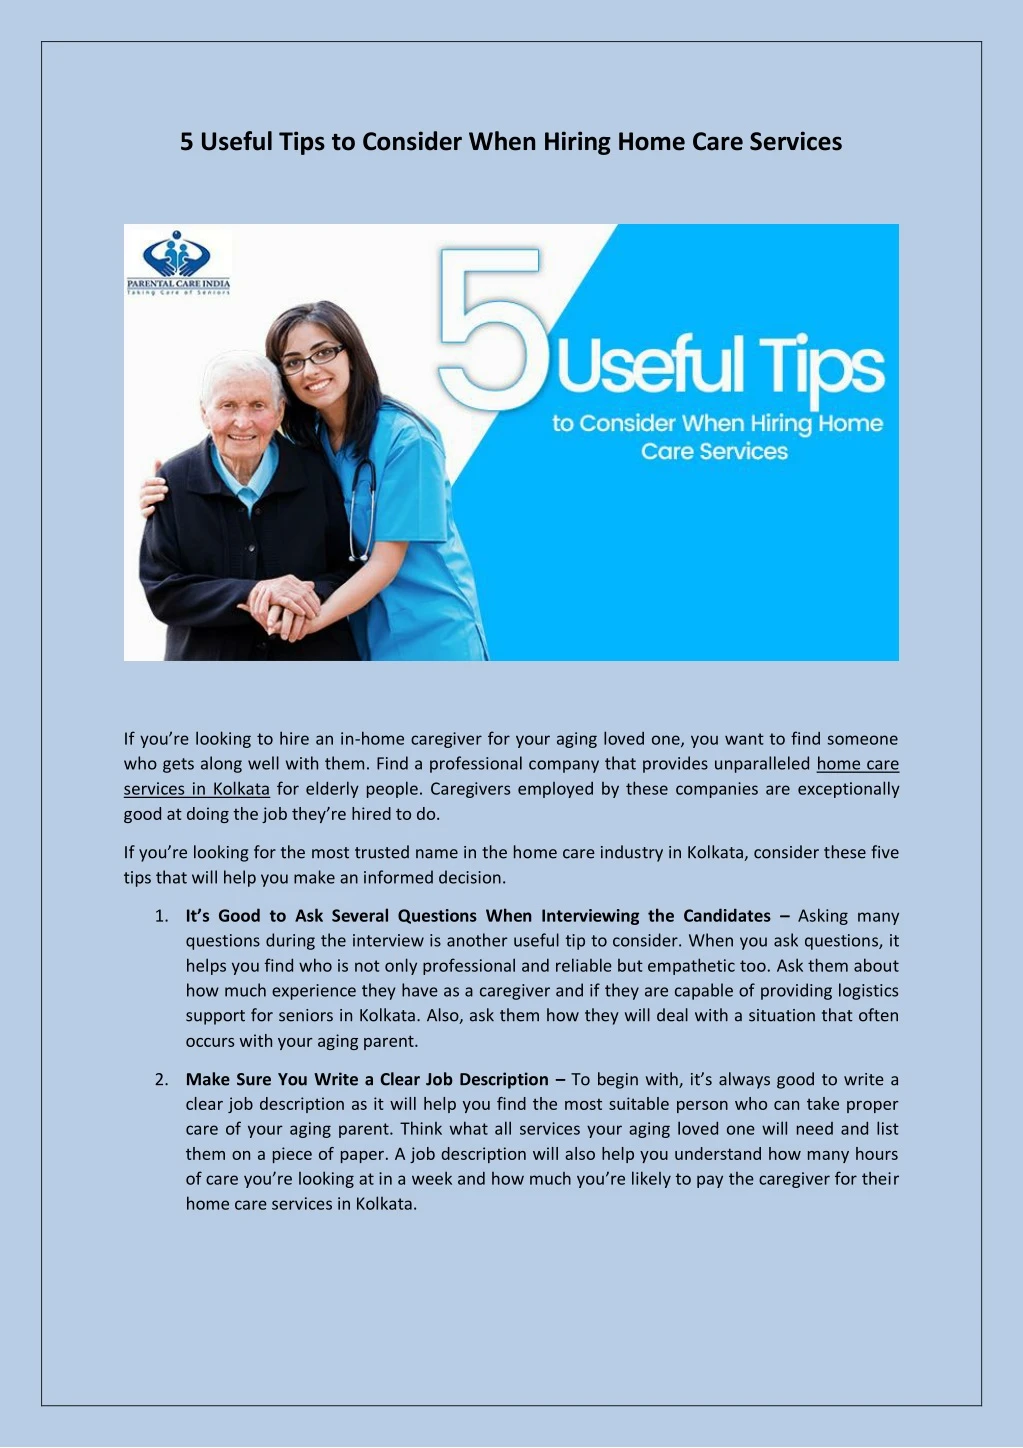 5 useful tips to consider when hiring home care